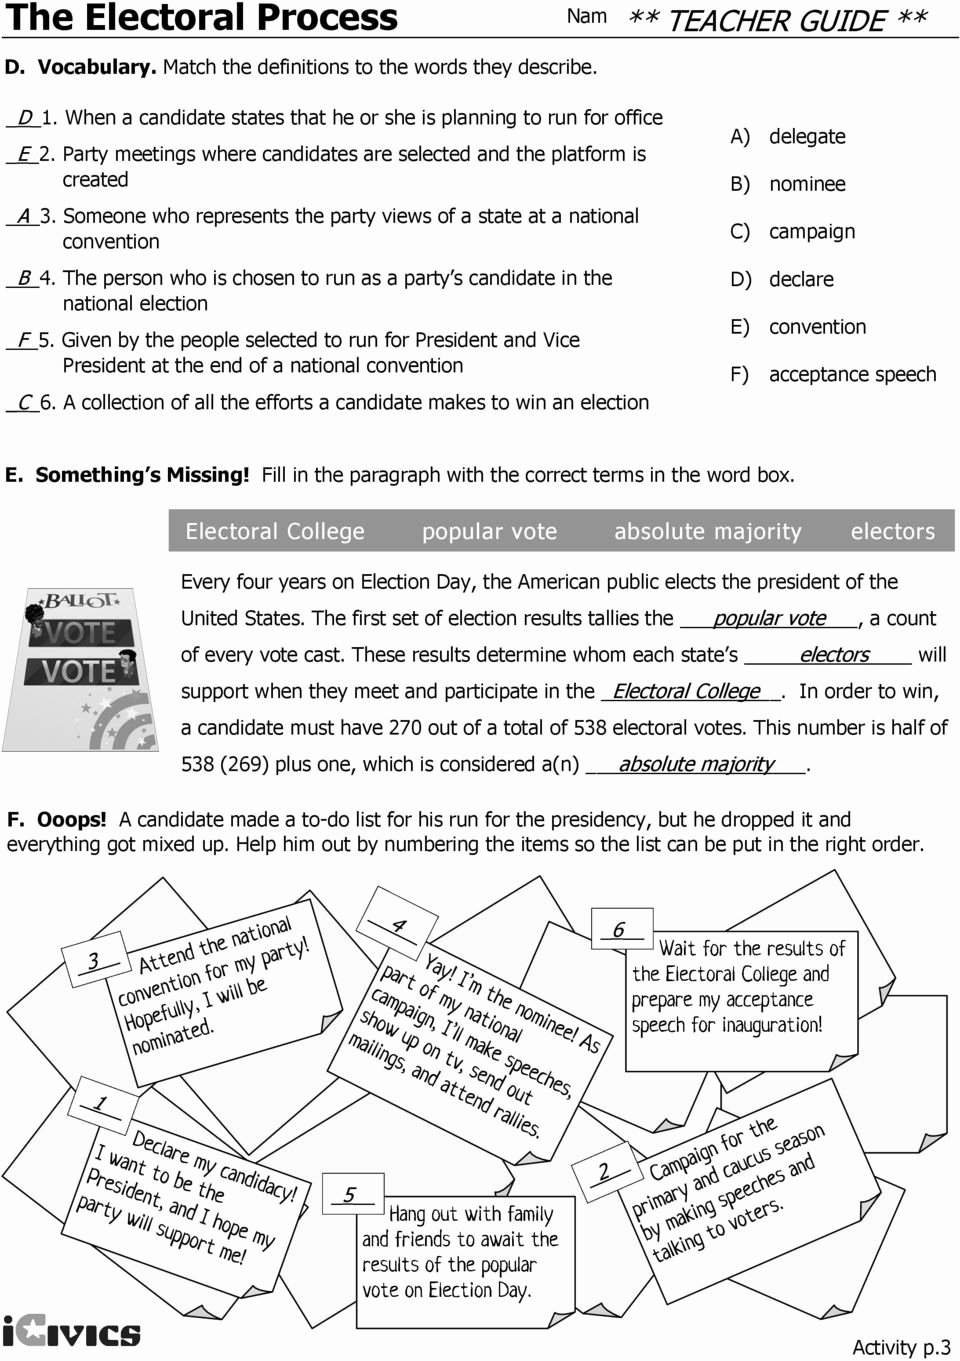 The Electoral Process Worksheet Answers Beautiful the Electoral Process Step by Step the Worksheet Activity